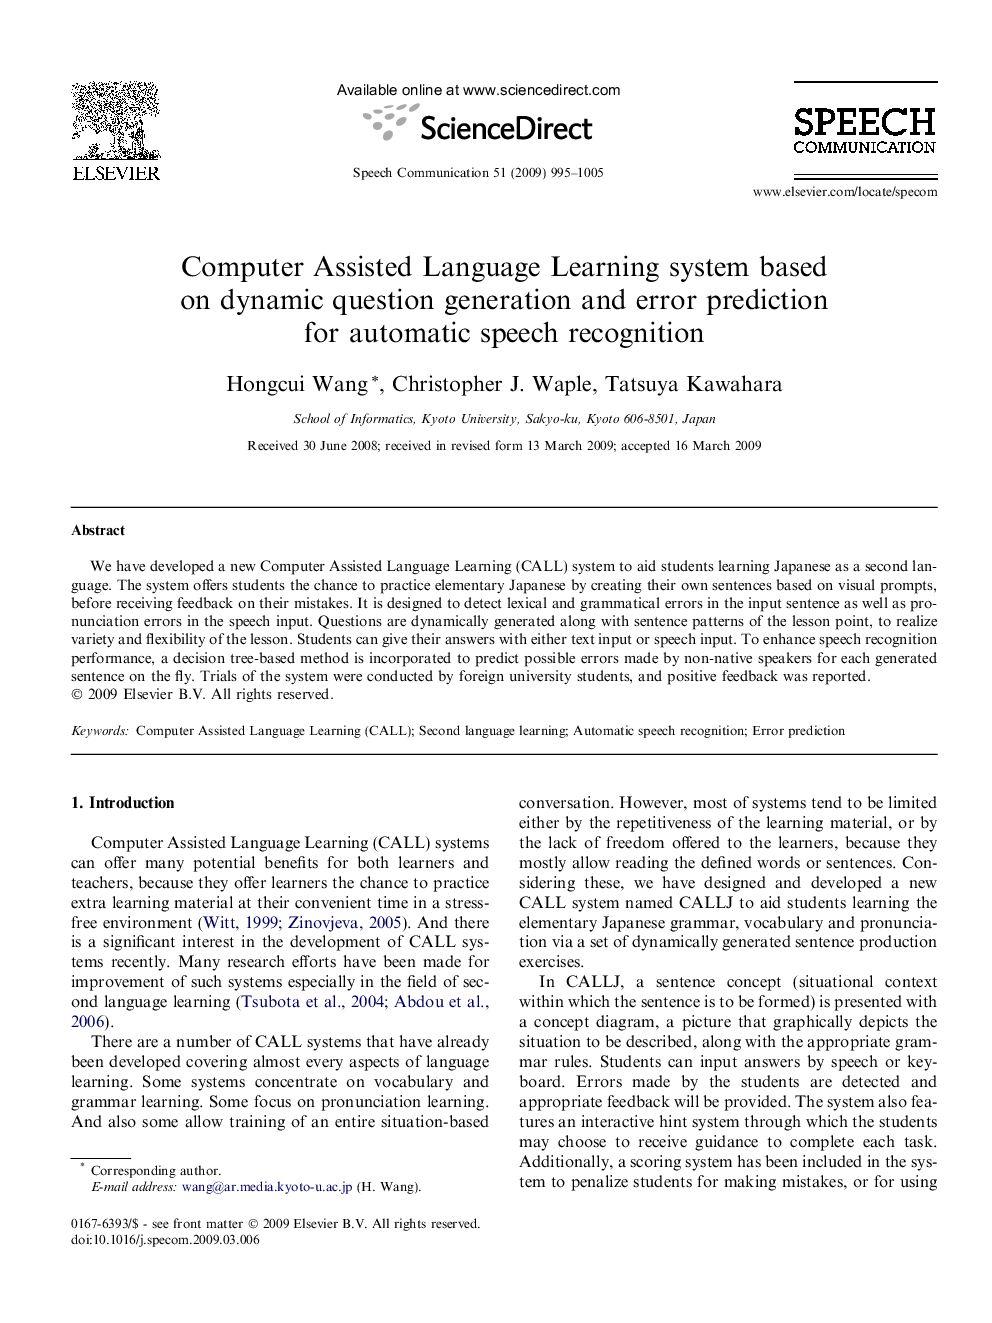 Computer Assisted Language Learning system based on dynamic question generation and error prediction for automatic speech recognition